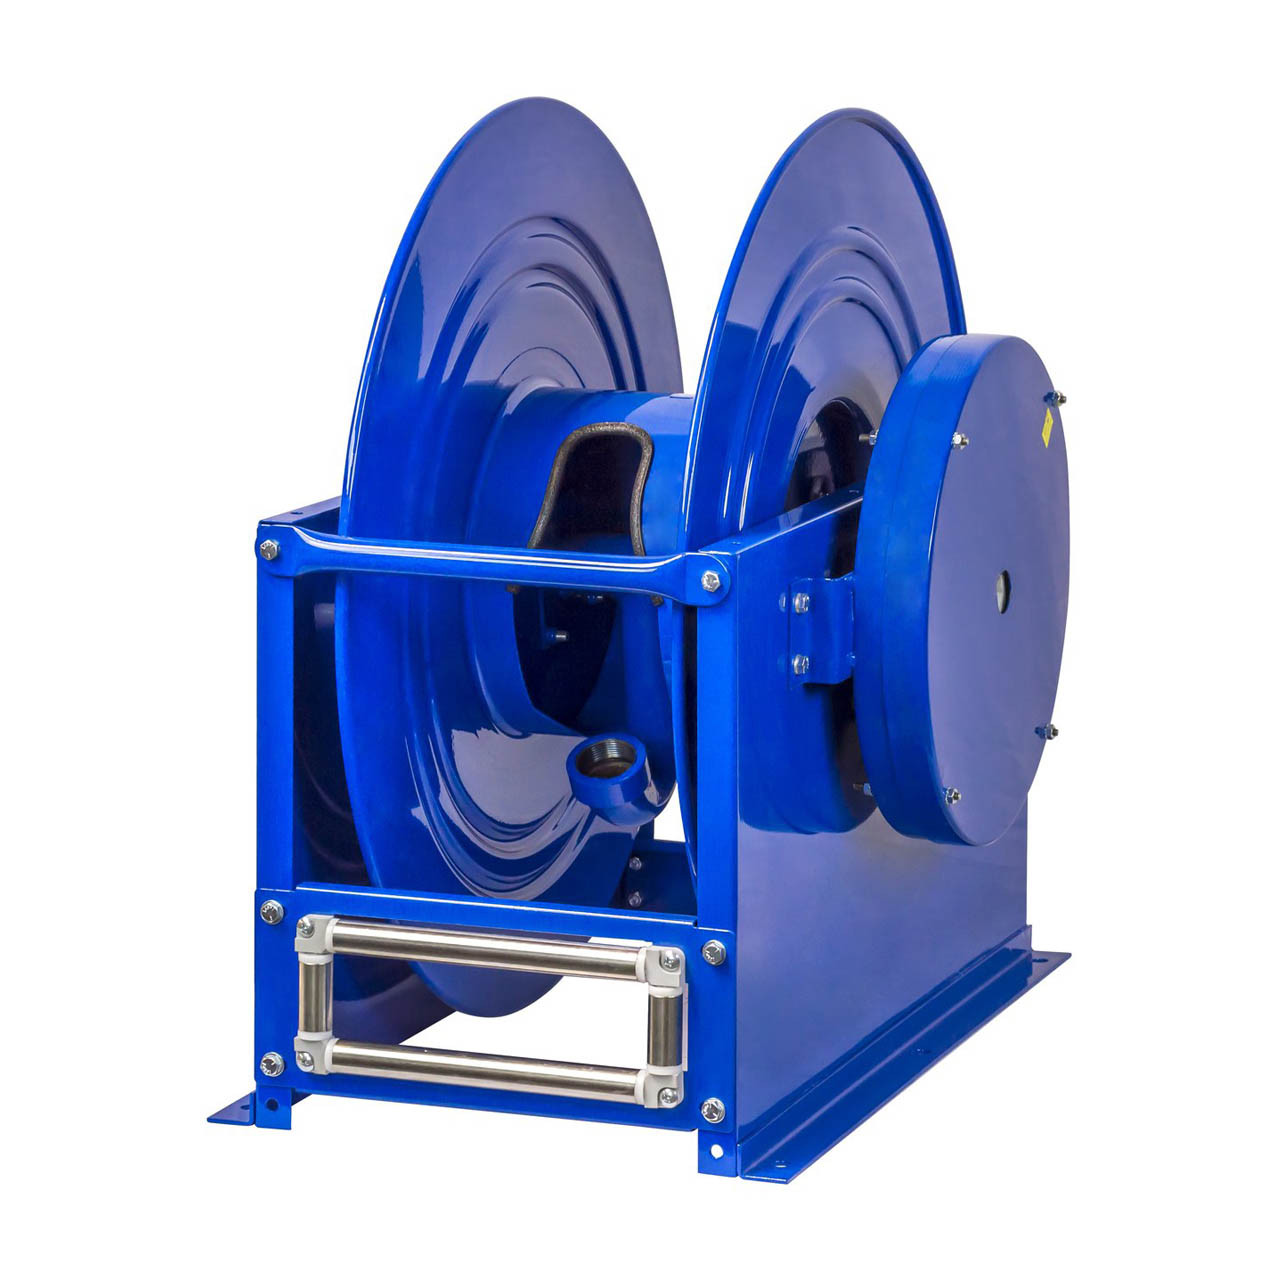 Coxreels Safety System Spring Driven Fuel Hose Reel 3/4in x 50' 300PSI  EZ-TSHF-550 - Acme Tools